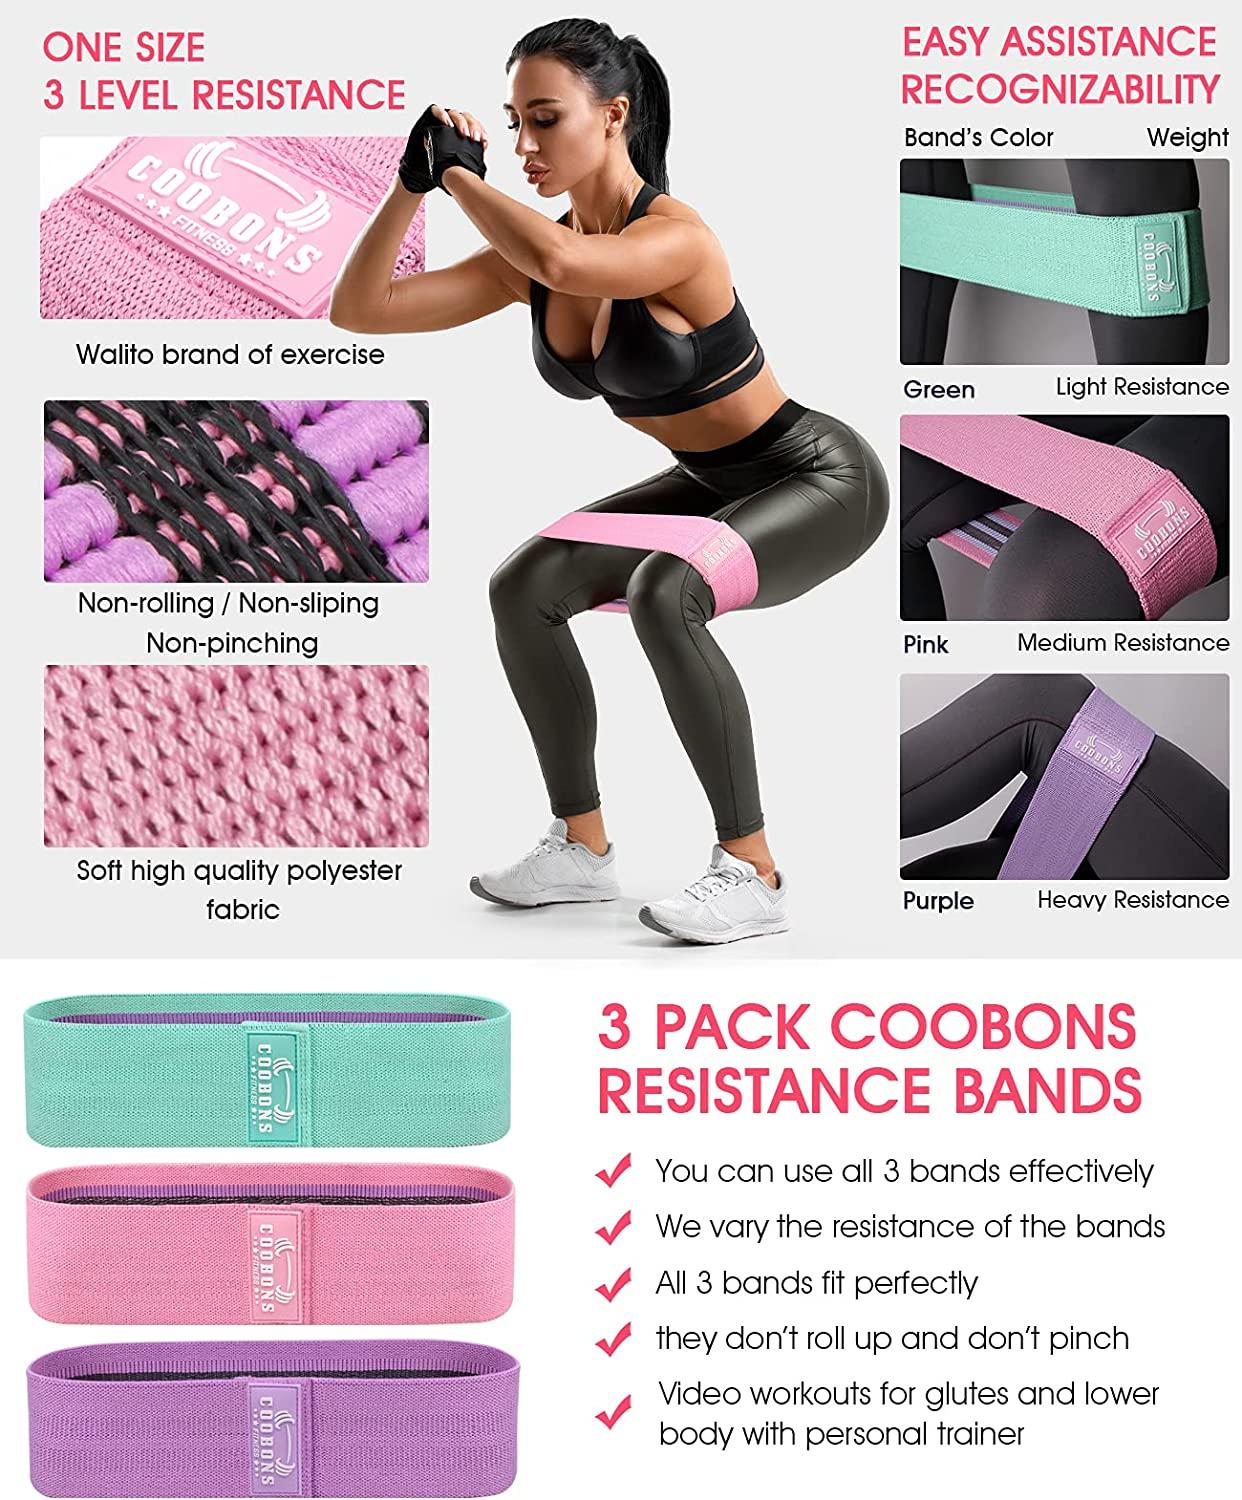 Shoppers Say the $19 Gymbee Resistance Bands Tone Their Glutes